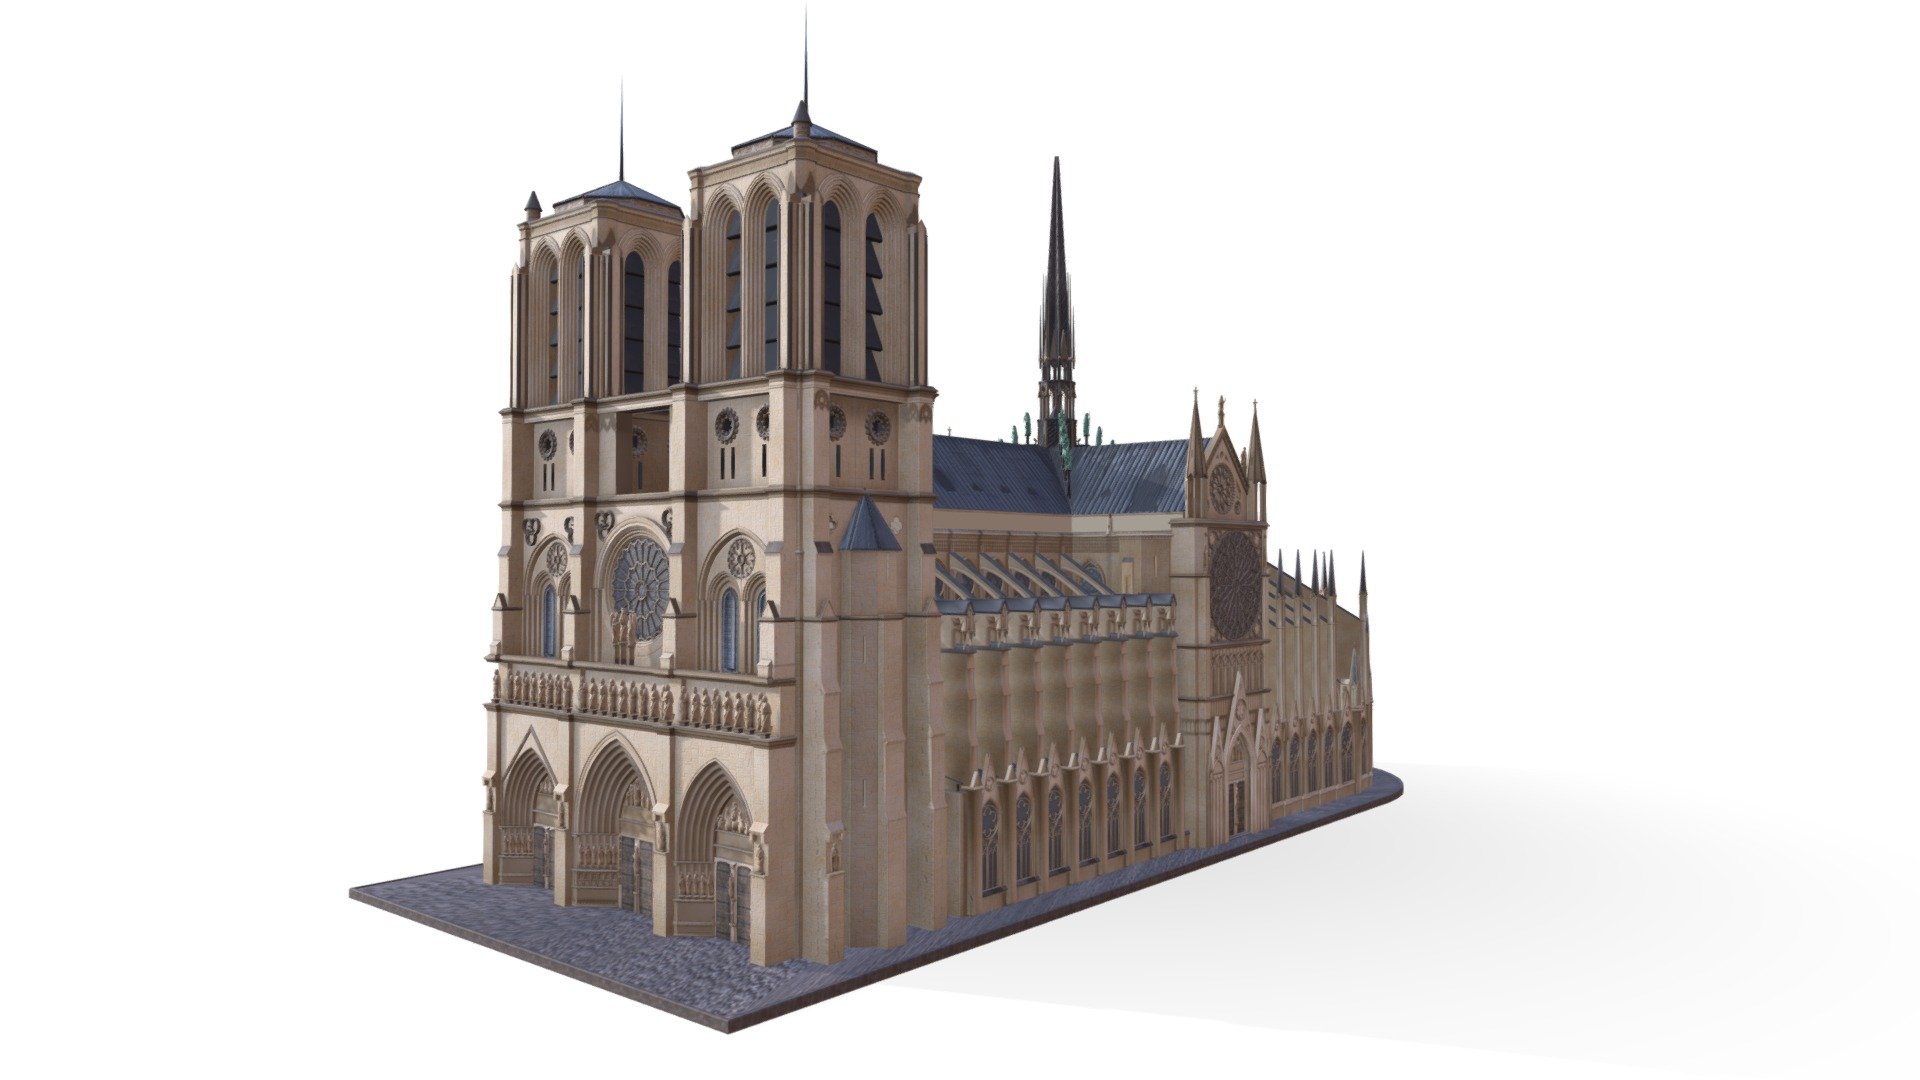 the-iconic-notre-dame-cathedral-on-fire-3d-model-by-dagensnyheter